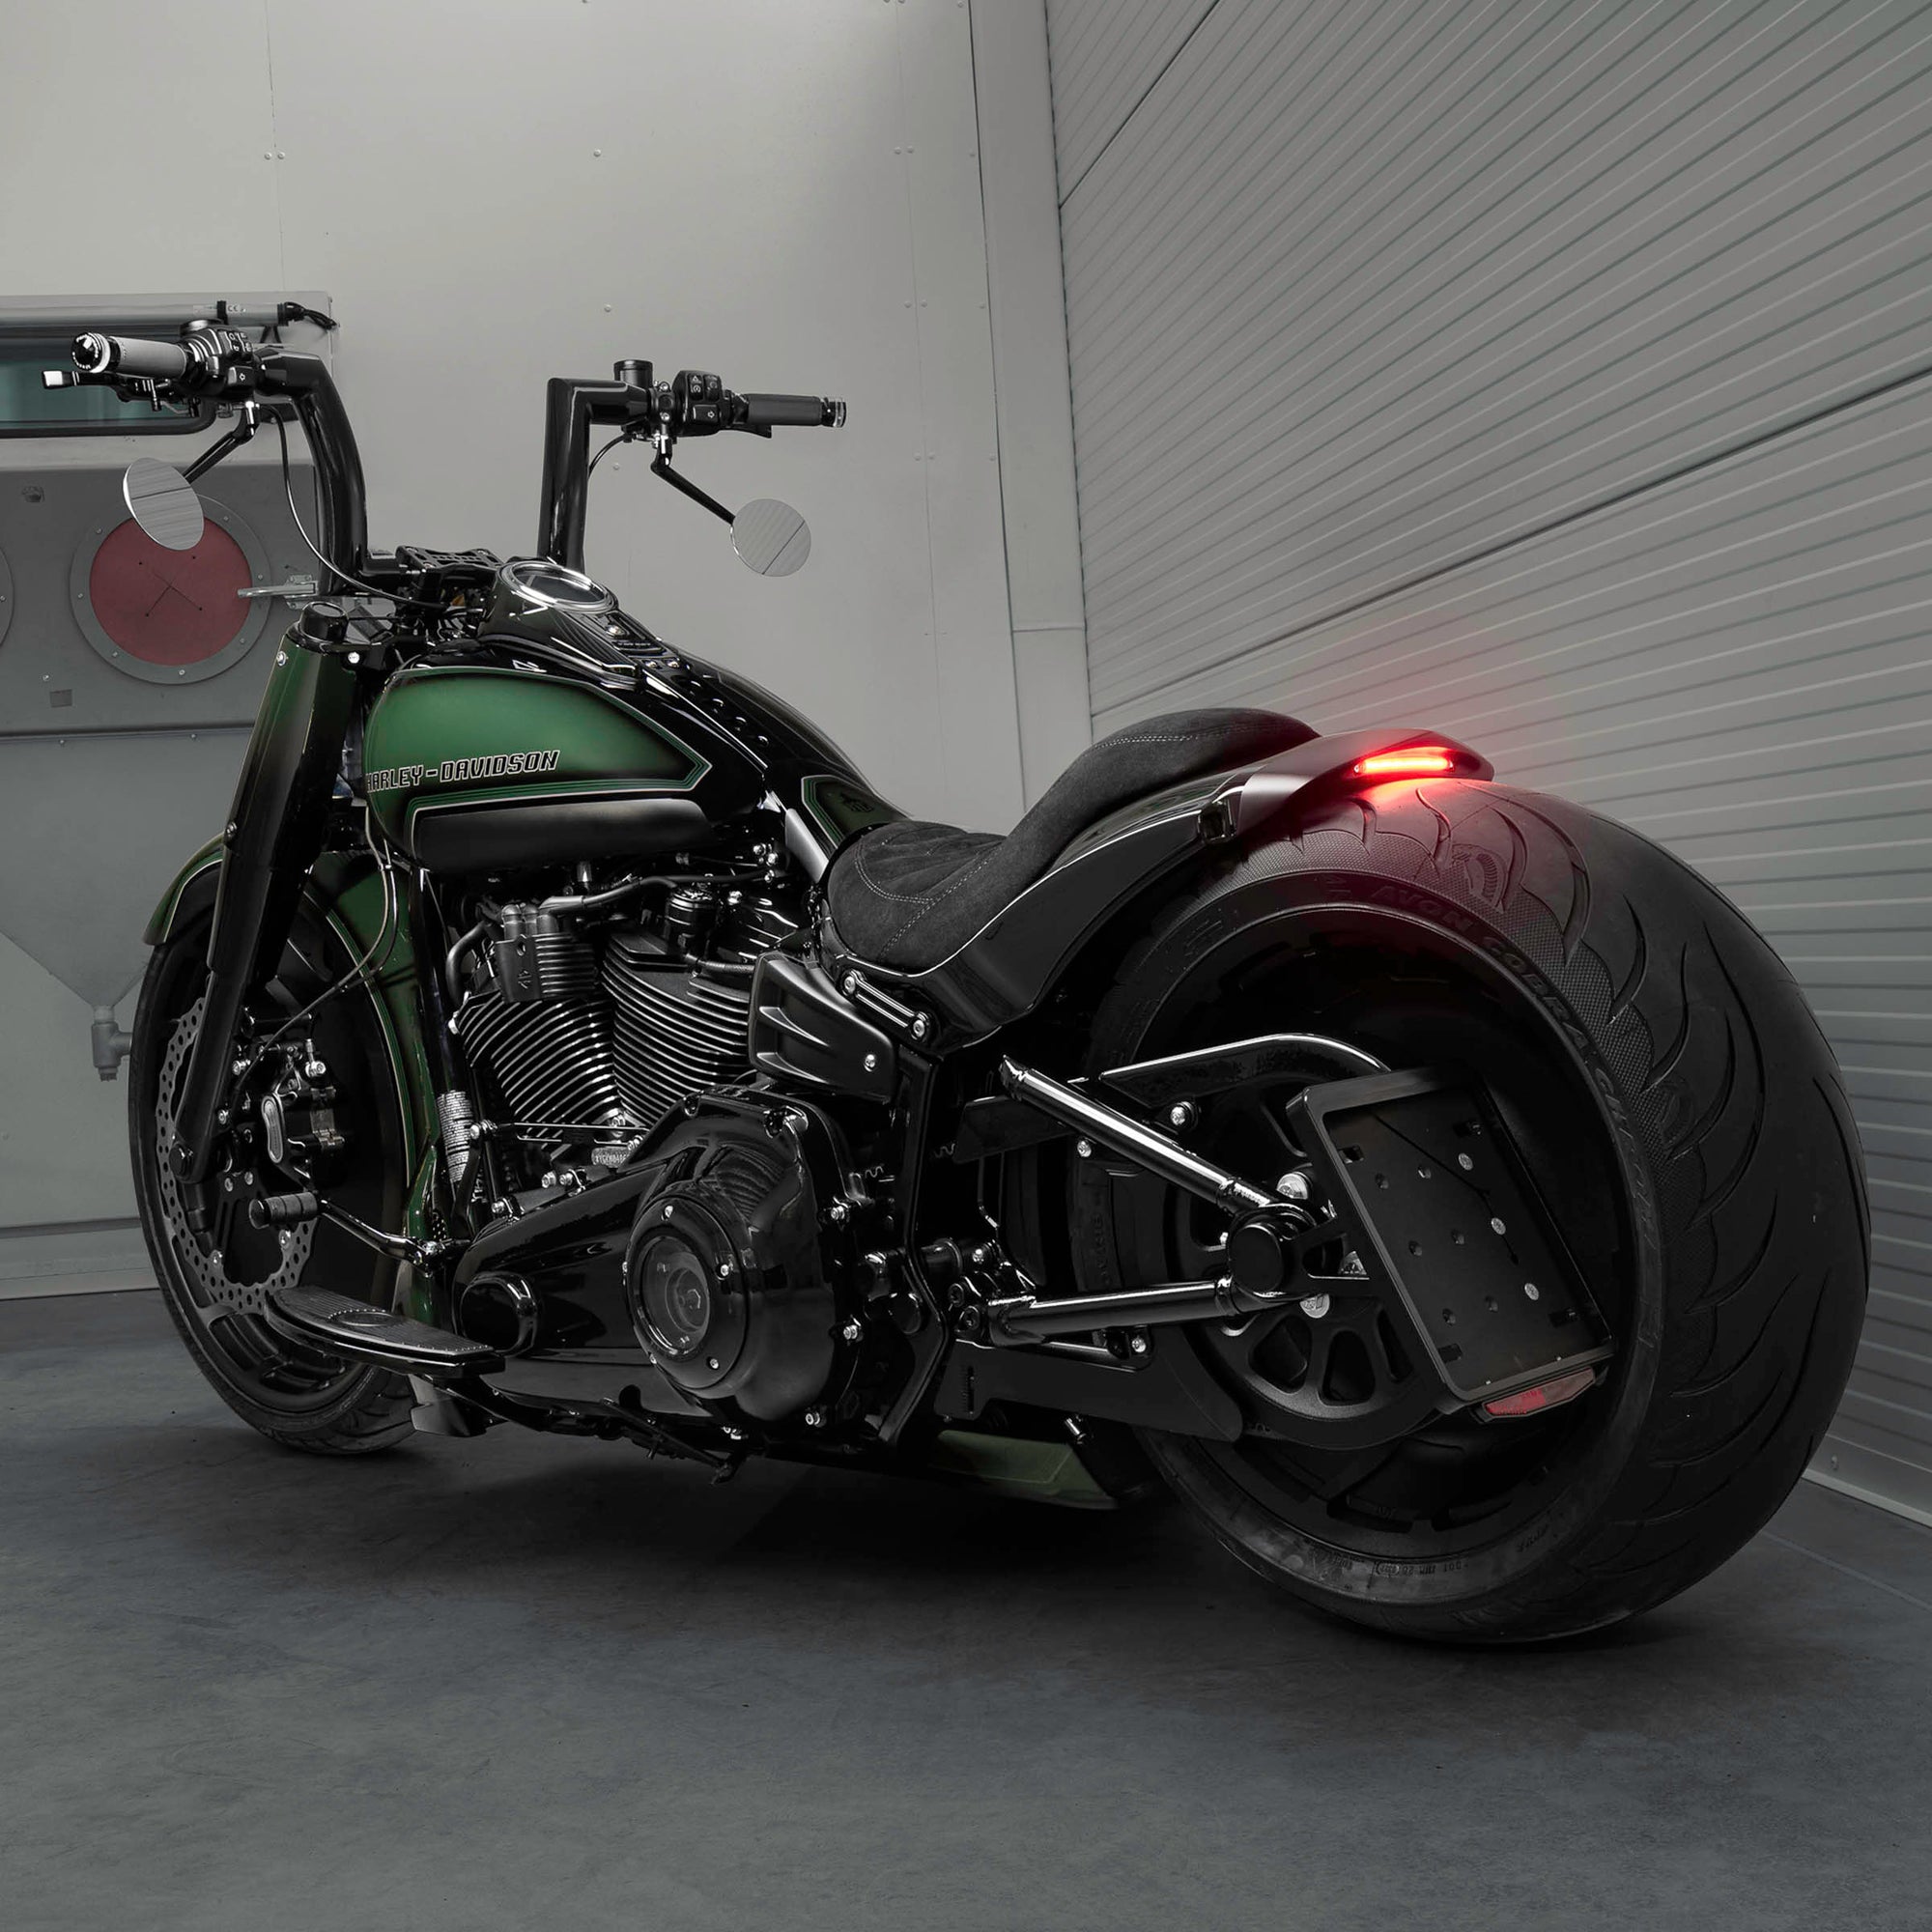 Modified Harley Davidson Fat Boy motorcycle with Killer Custom parts from the rear in a spacious and modern garage